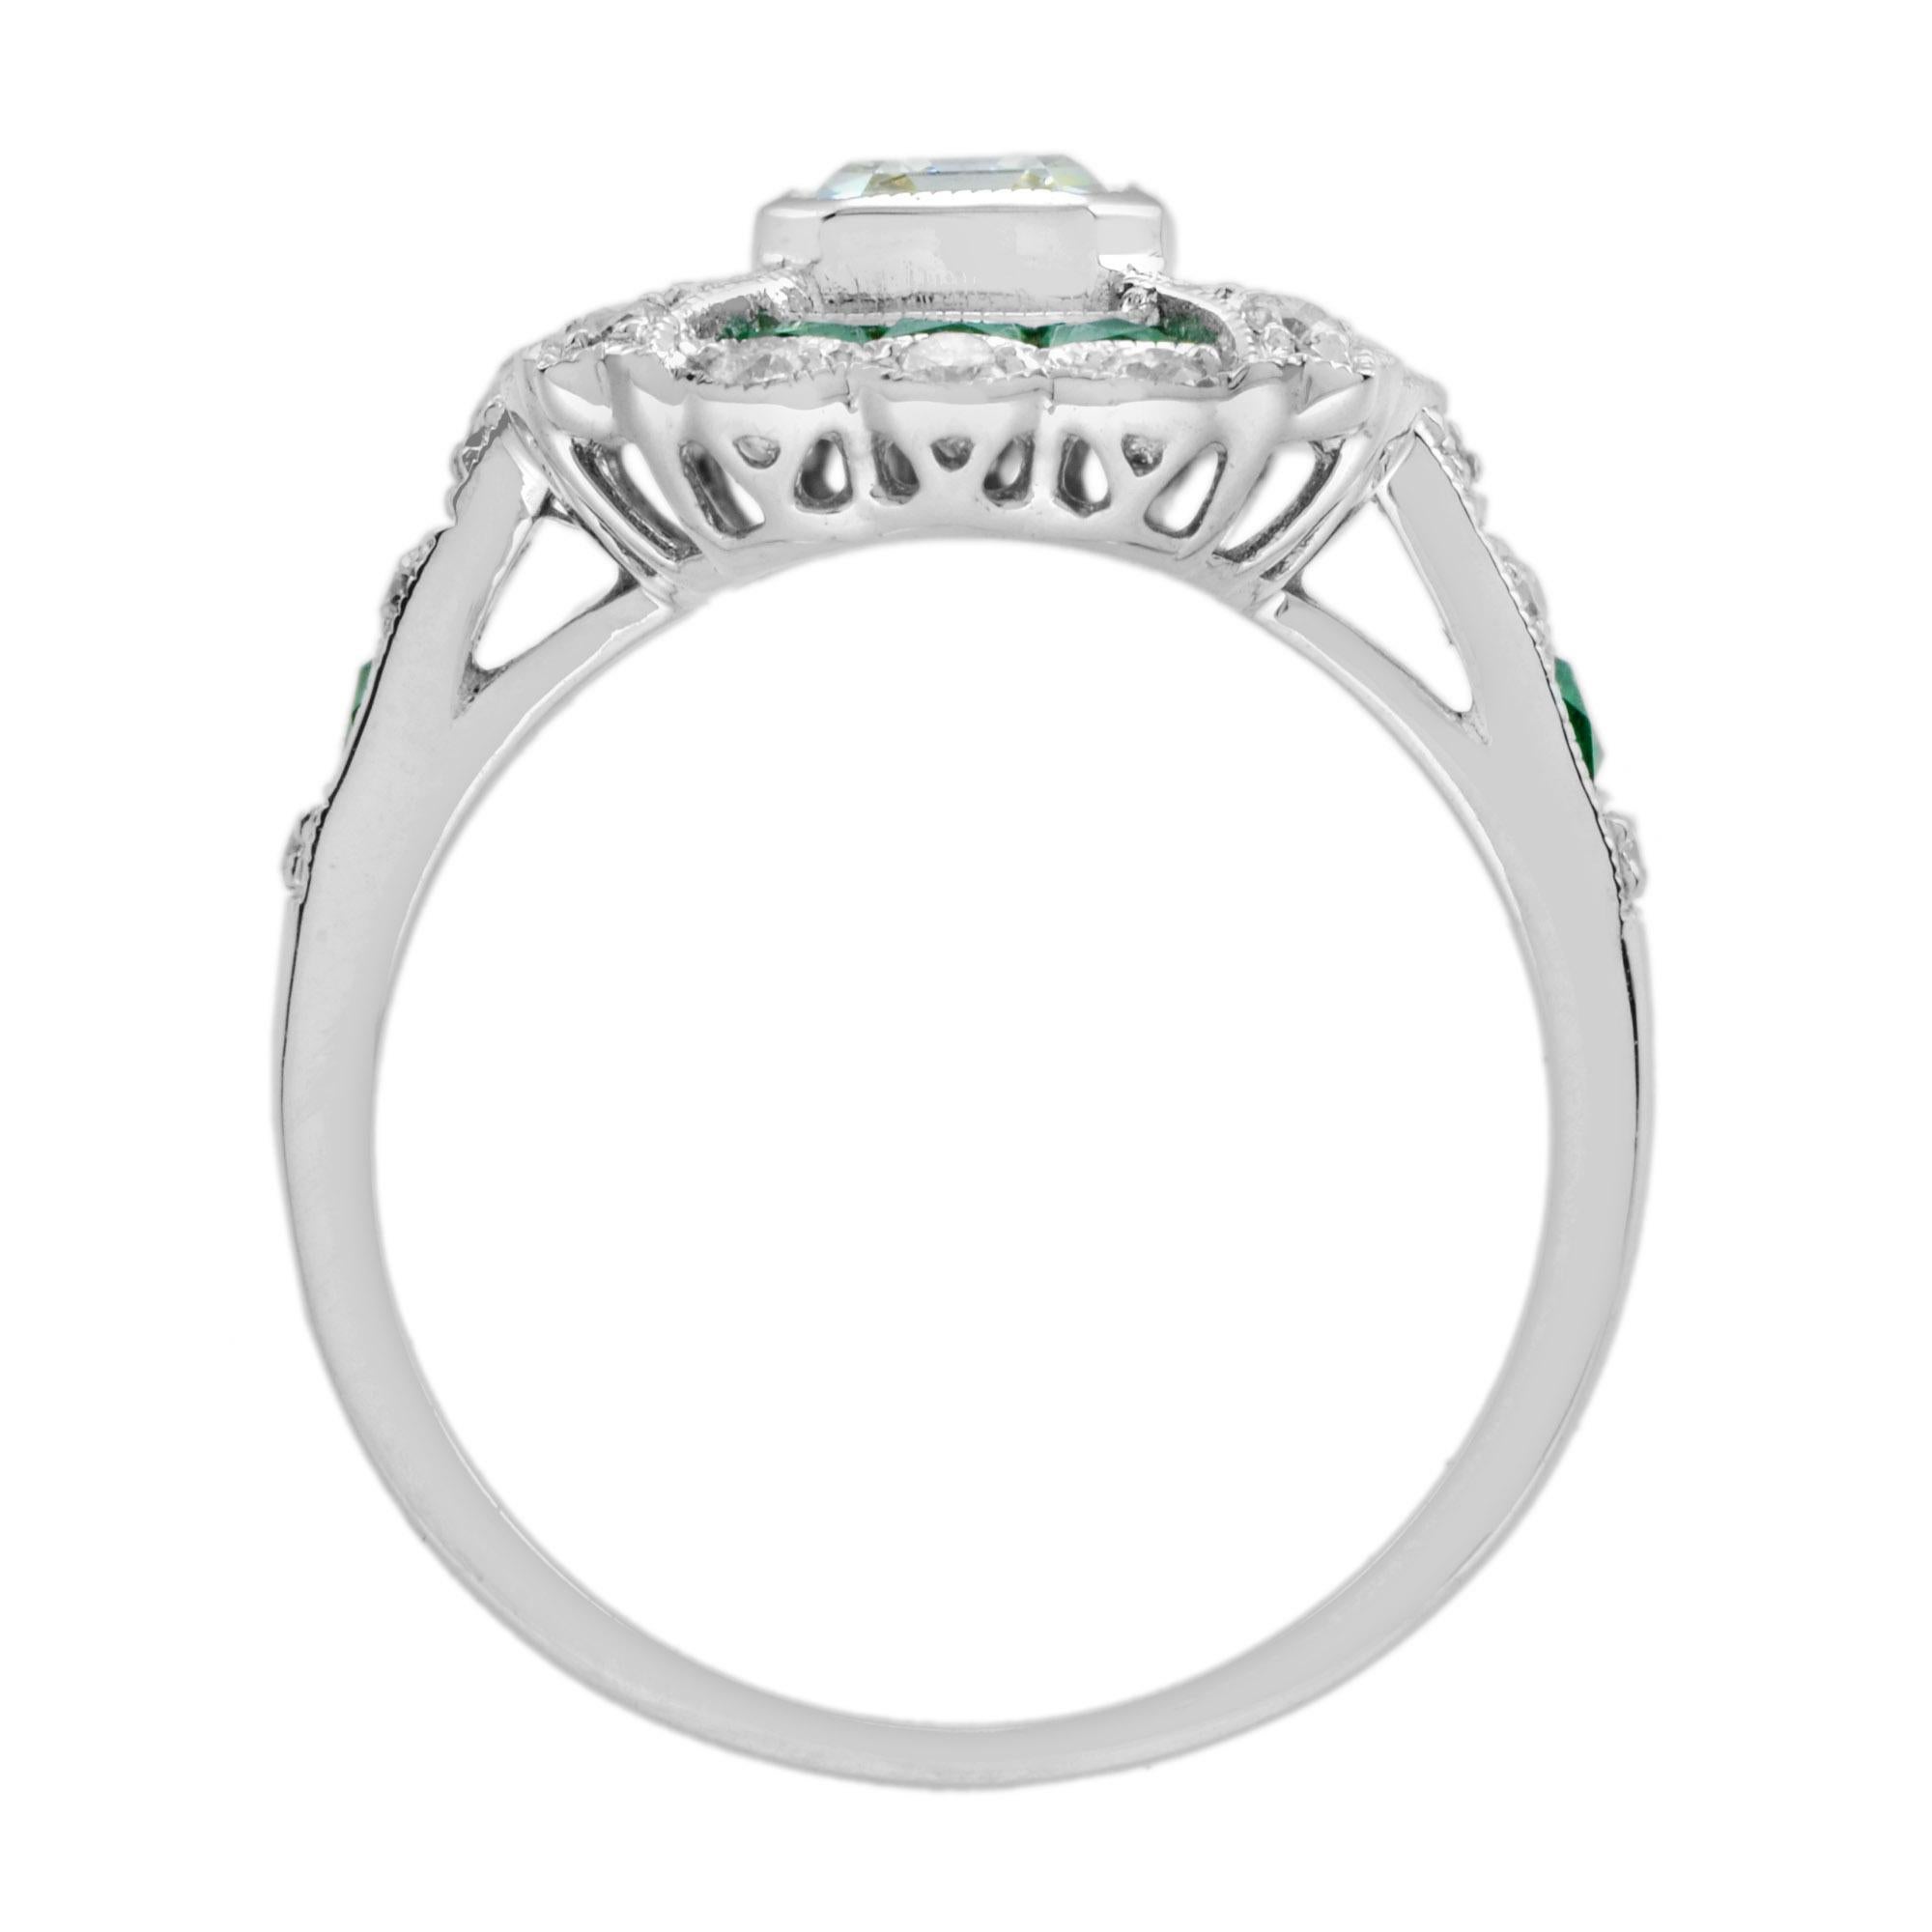 GIA Emerald Cut Diamond Emerald Art Deco Style Engagement Ring in 18k Gold For Sale 3